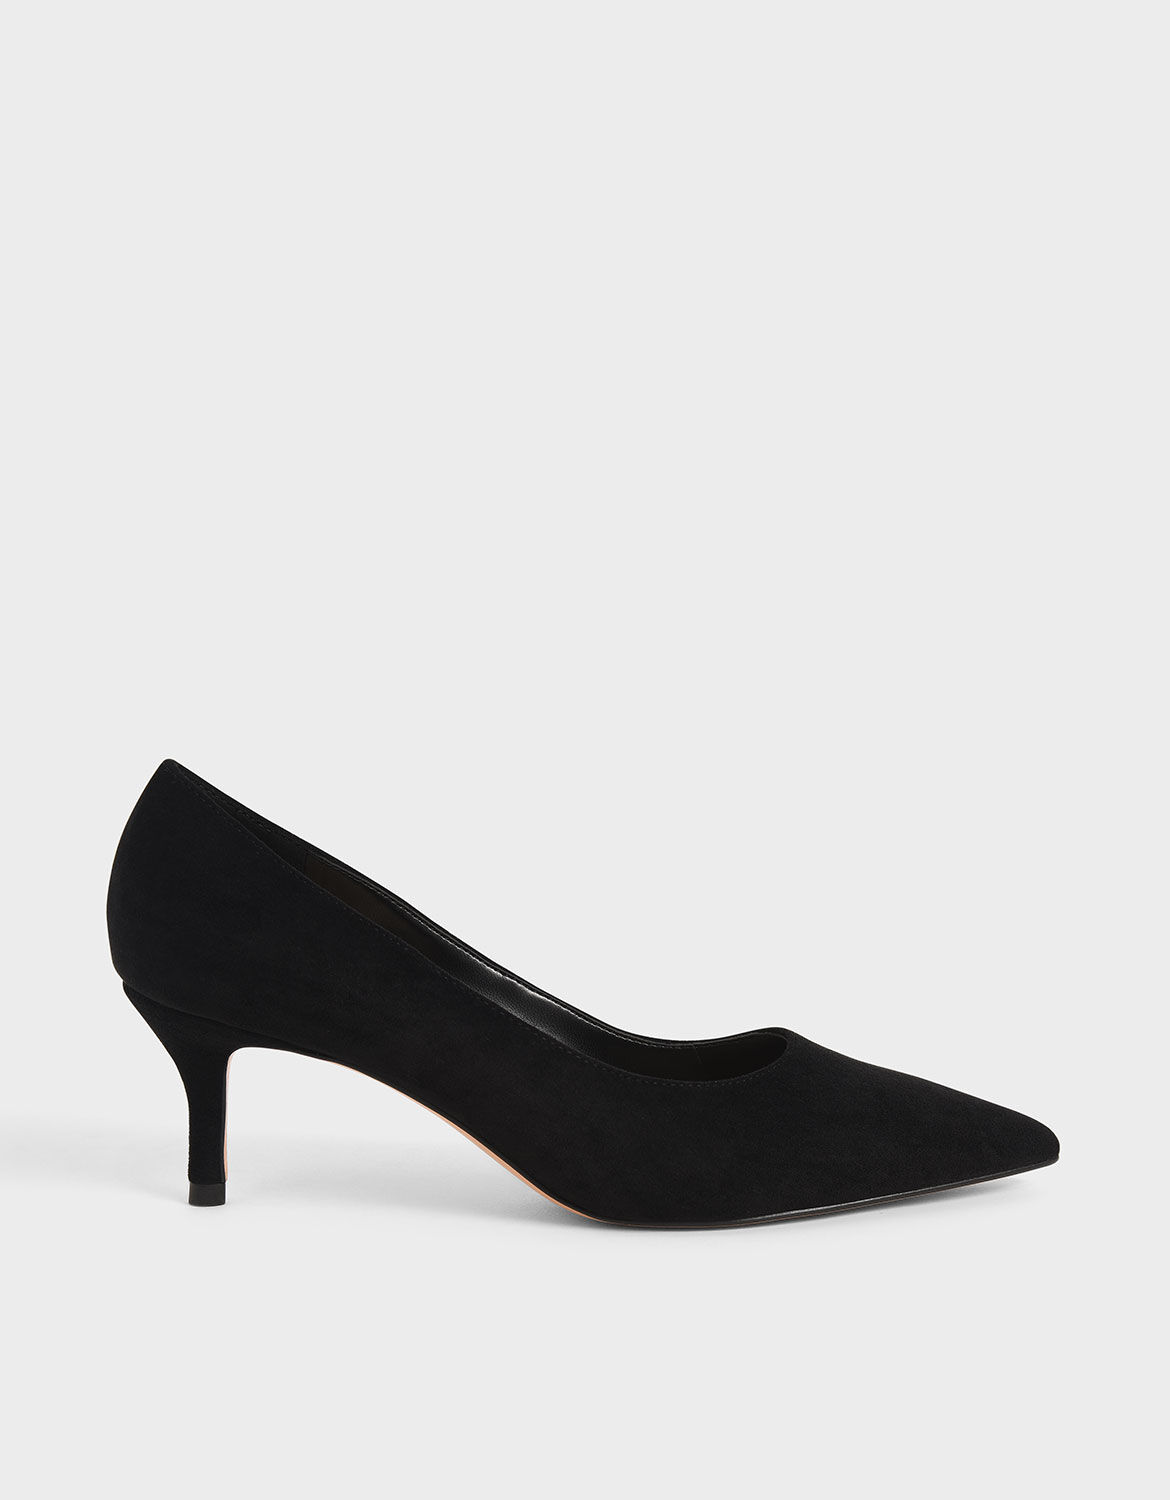 Black Textured Textured Pointed Toe 